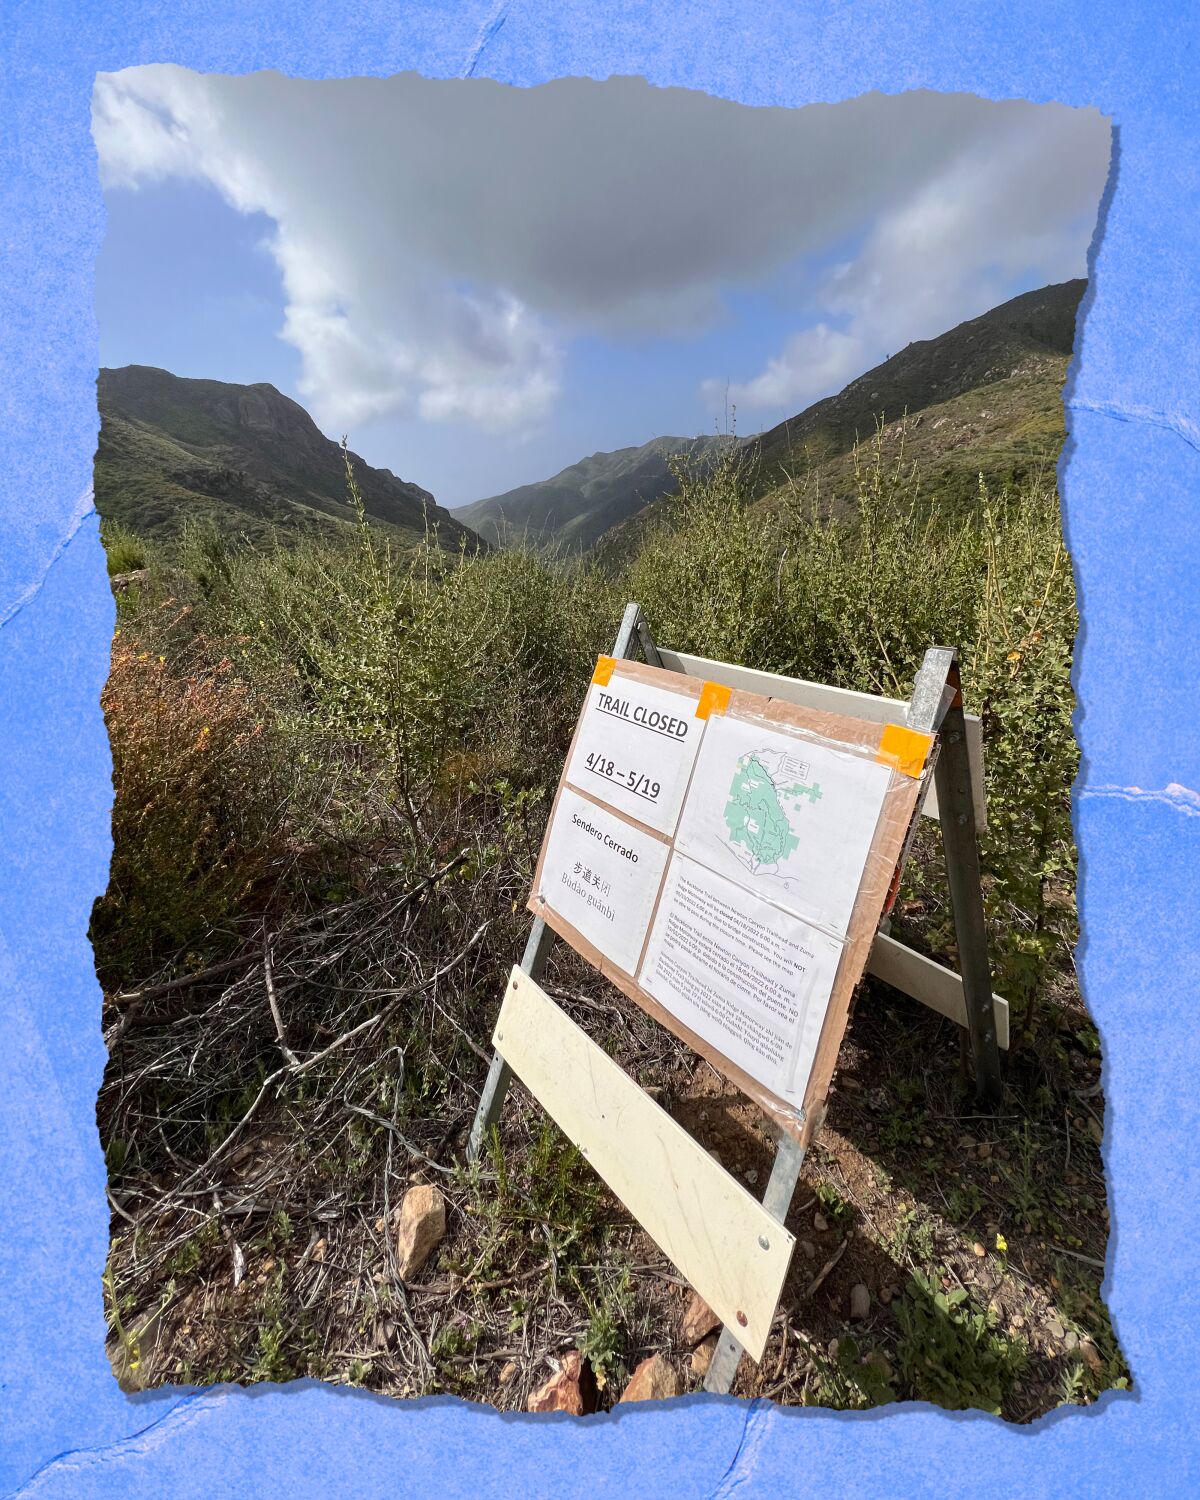 A sign that says "Trail Closed" sits in a grassy area with mountains and blue sky in the background.